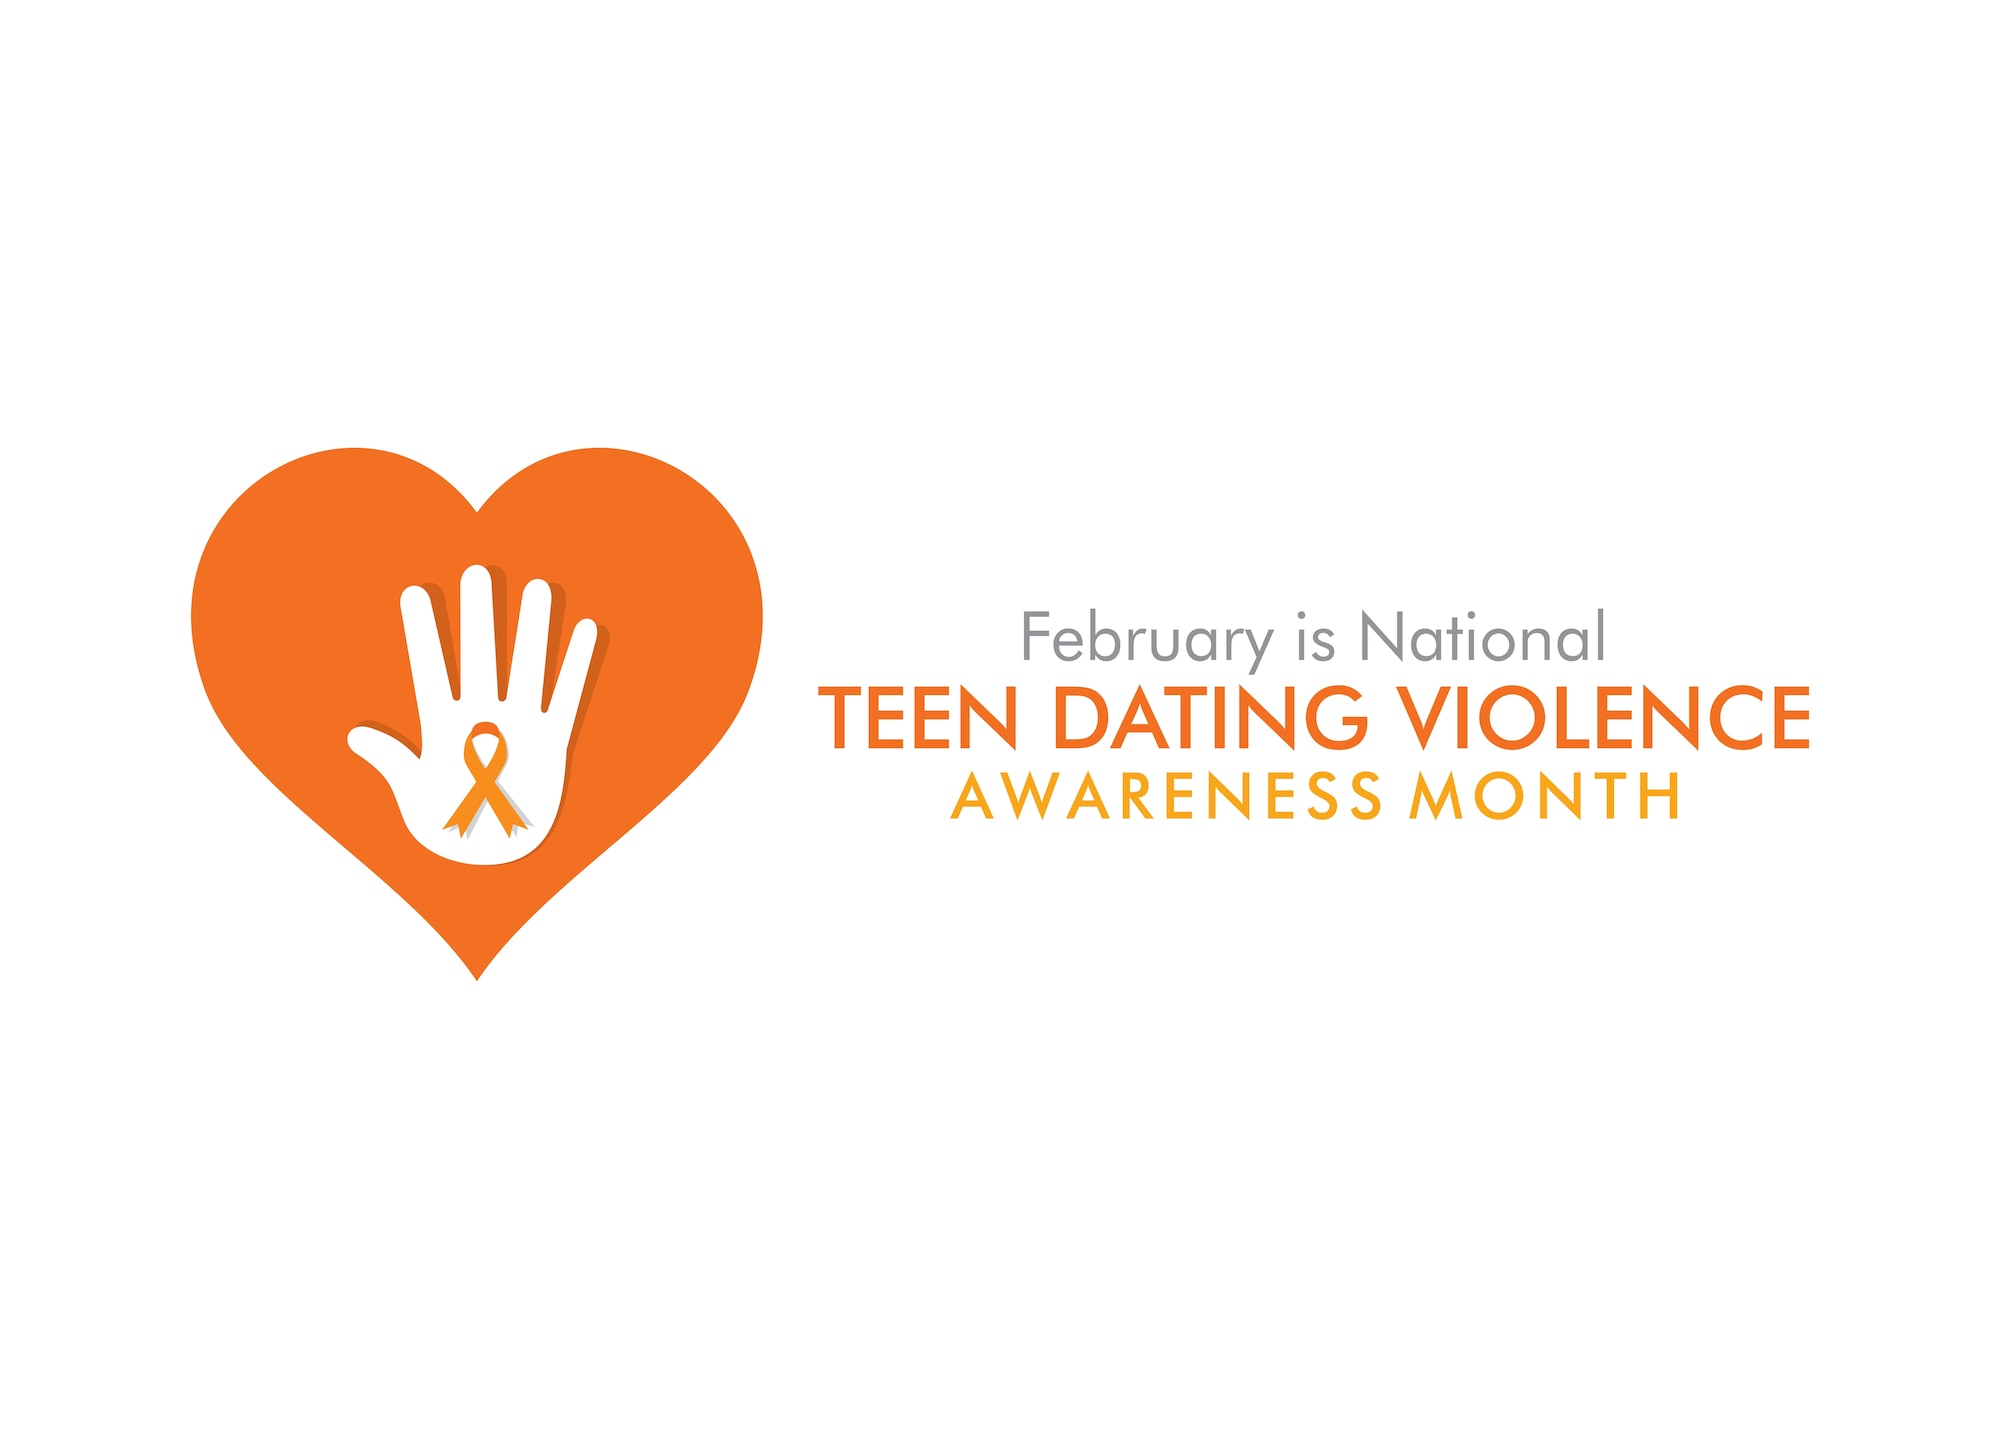 Graphic says, "February is National Teen Dating Violence Awareness Month" with a orange heart containing a hand with an orange ribbon on it.